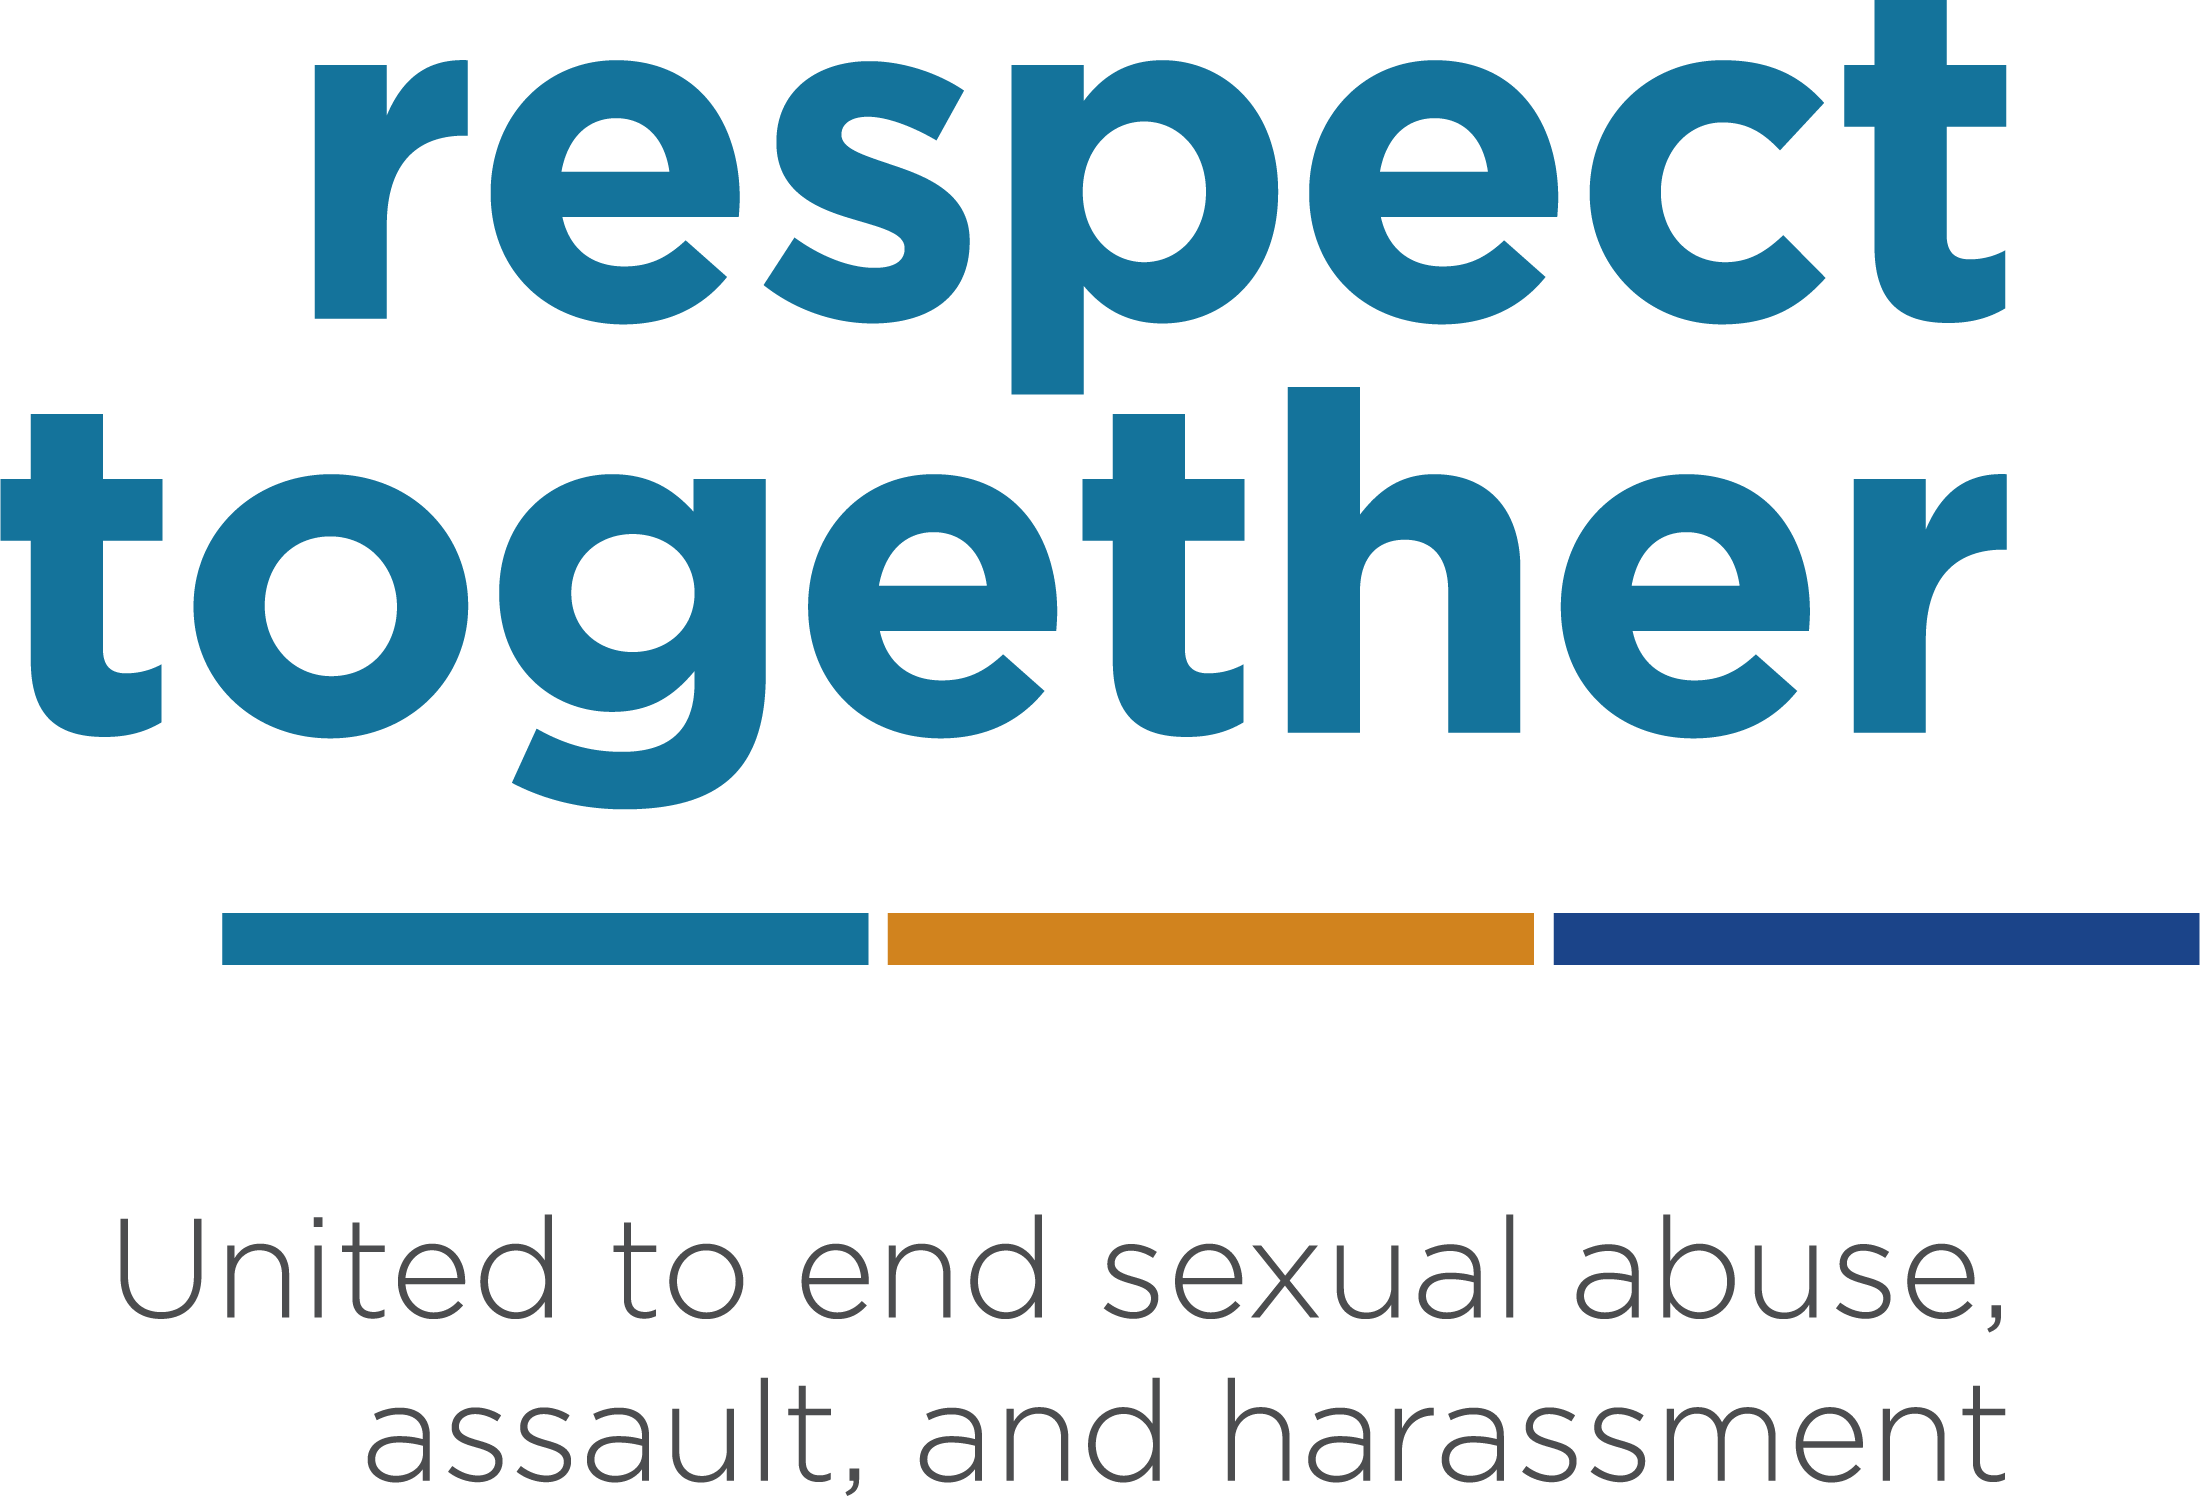 Respect Together - United to end sexual abuse, assault, and harassment - logo and tagline